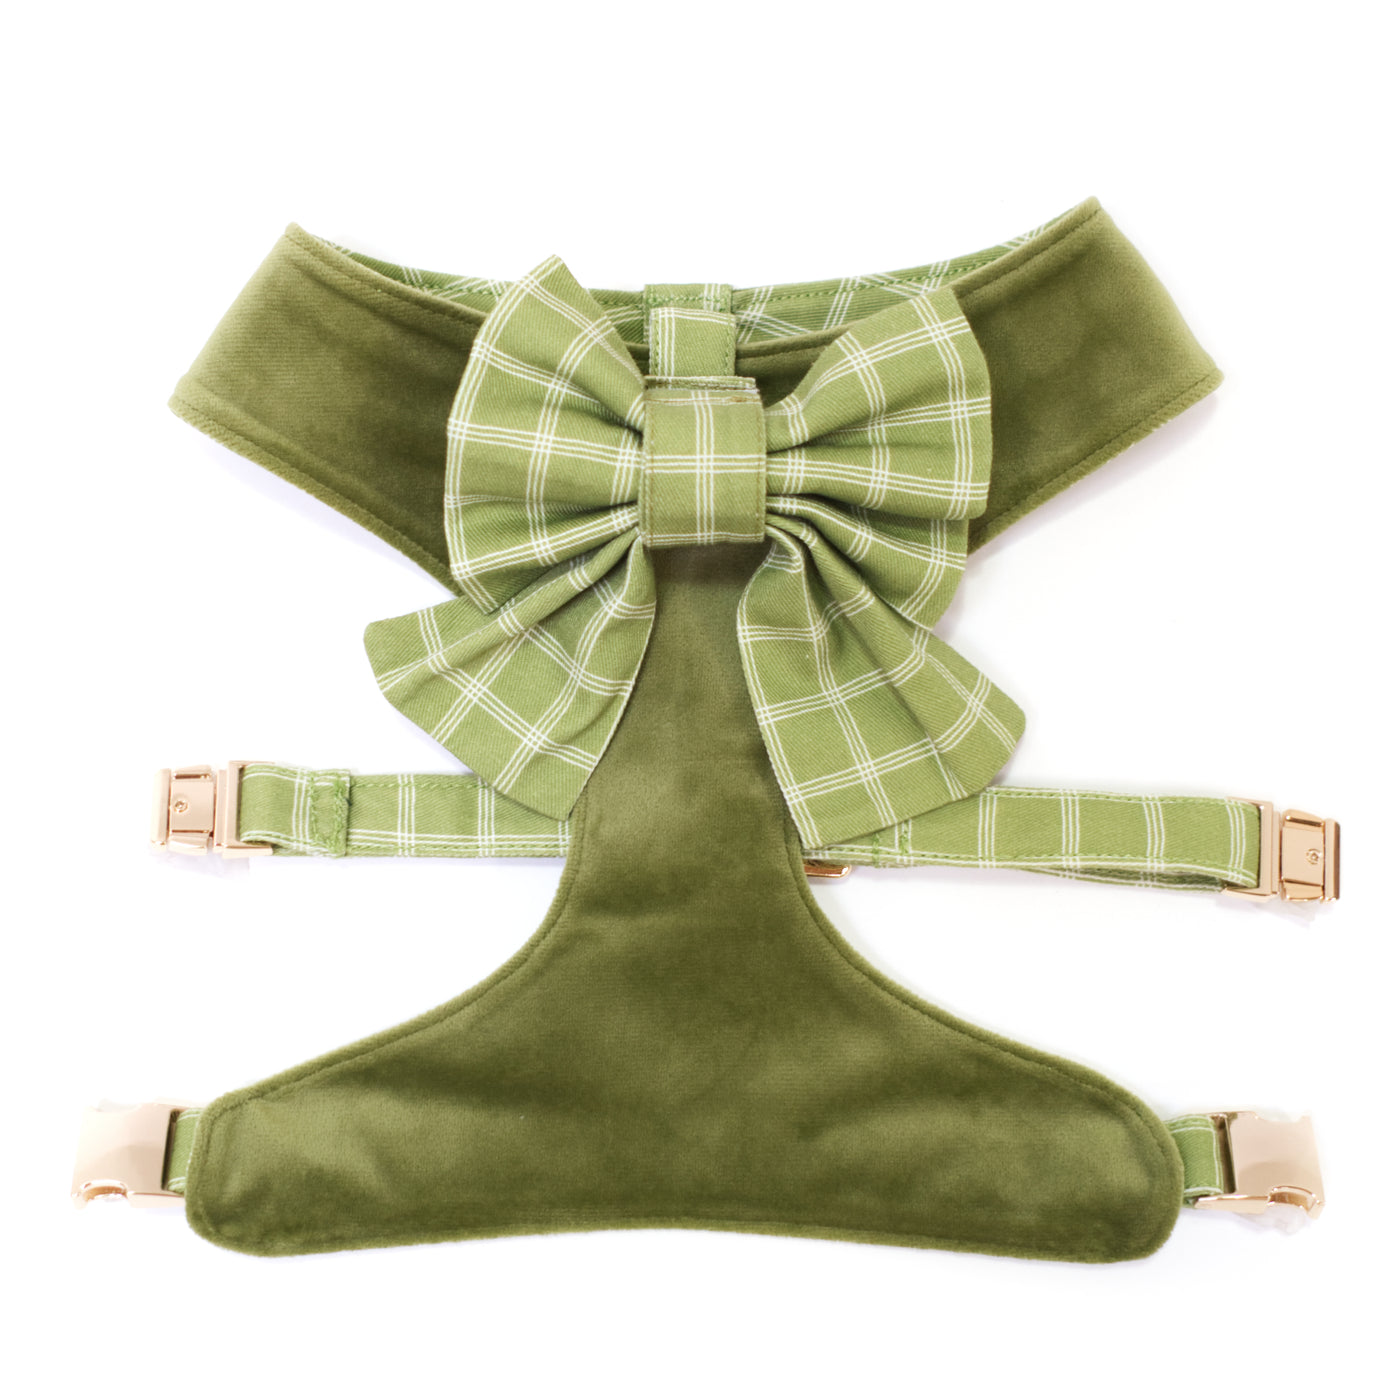 Moss green velvet dog harness with gold hardware and removable plaid sailor dog bow